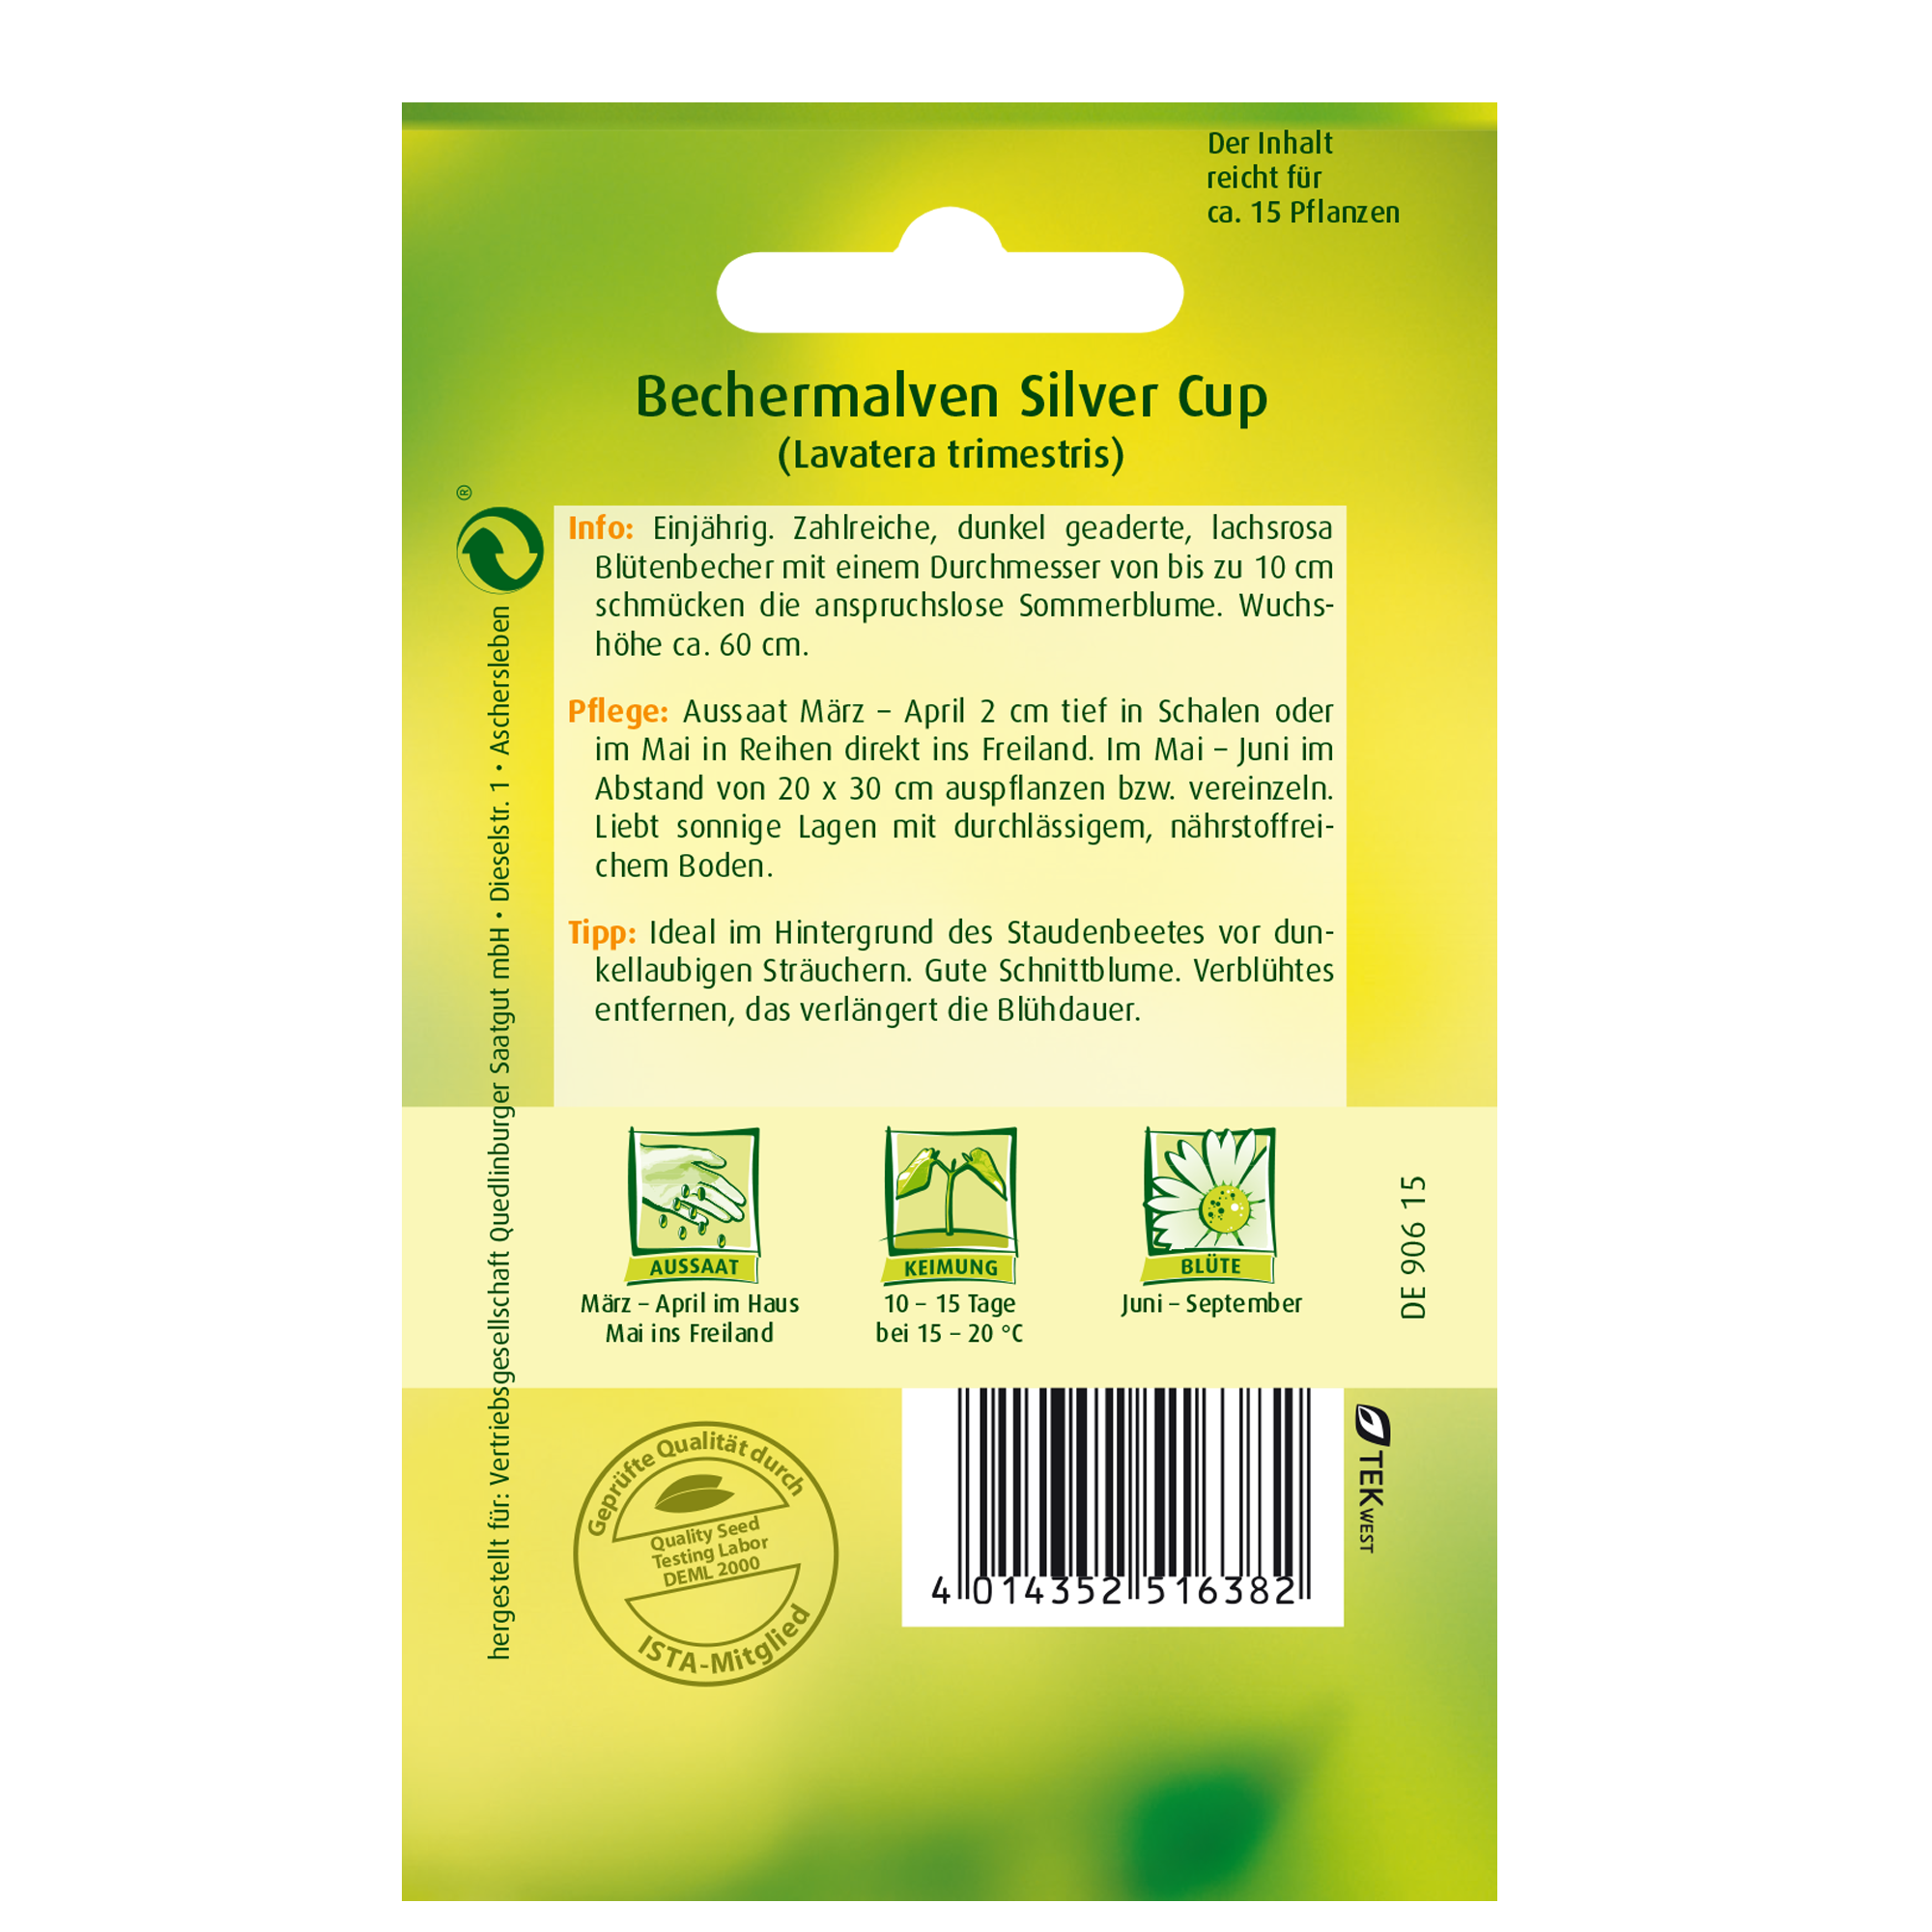 Bechermalven 'Silver Cup' + product picture